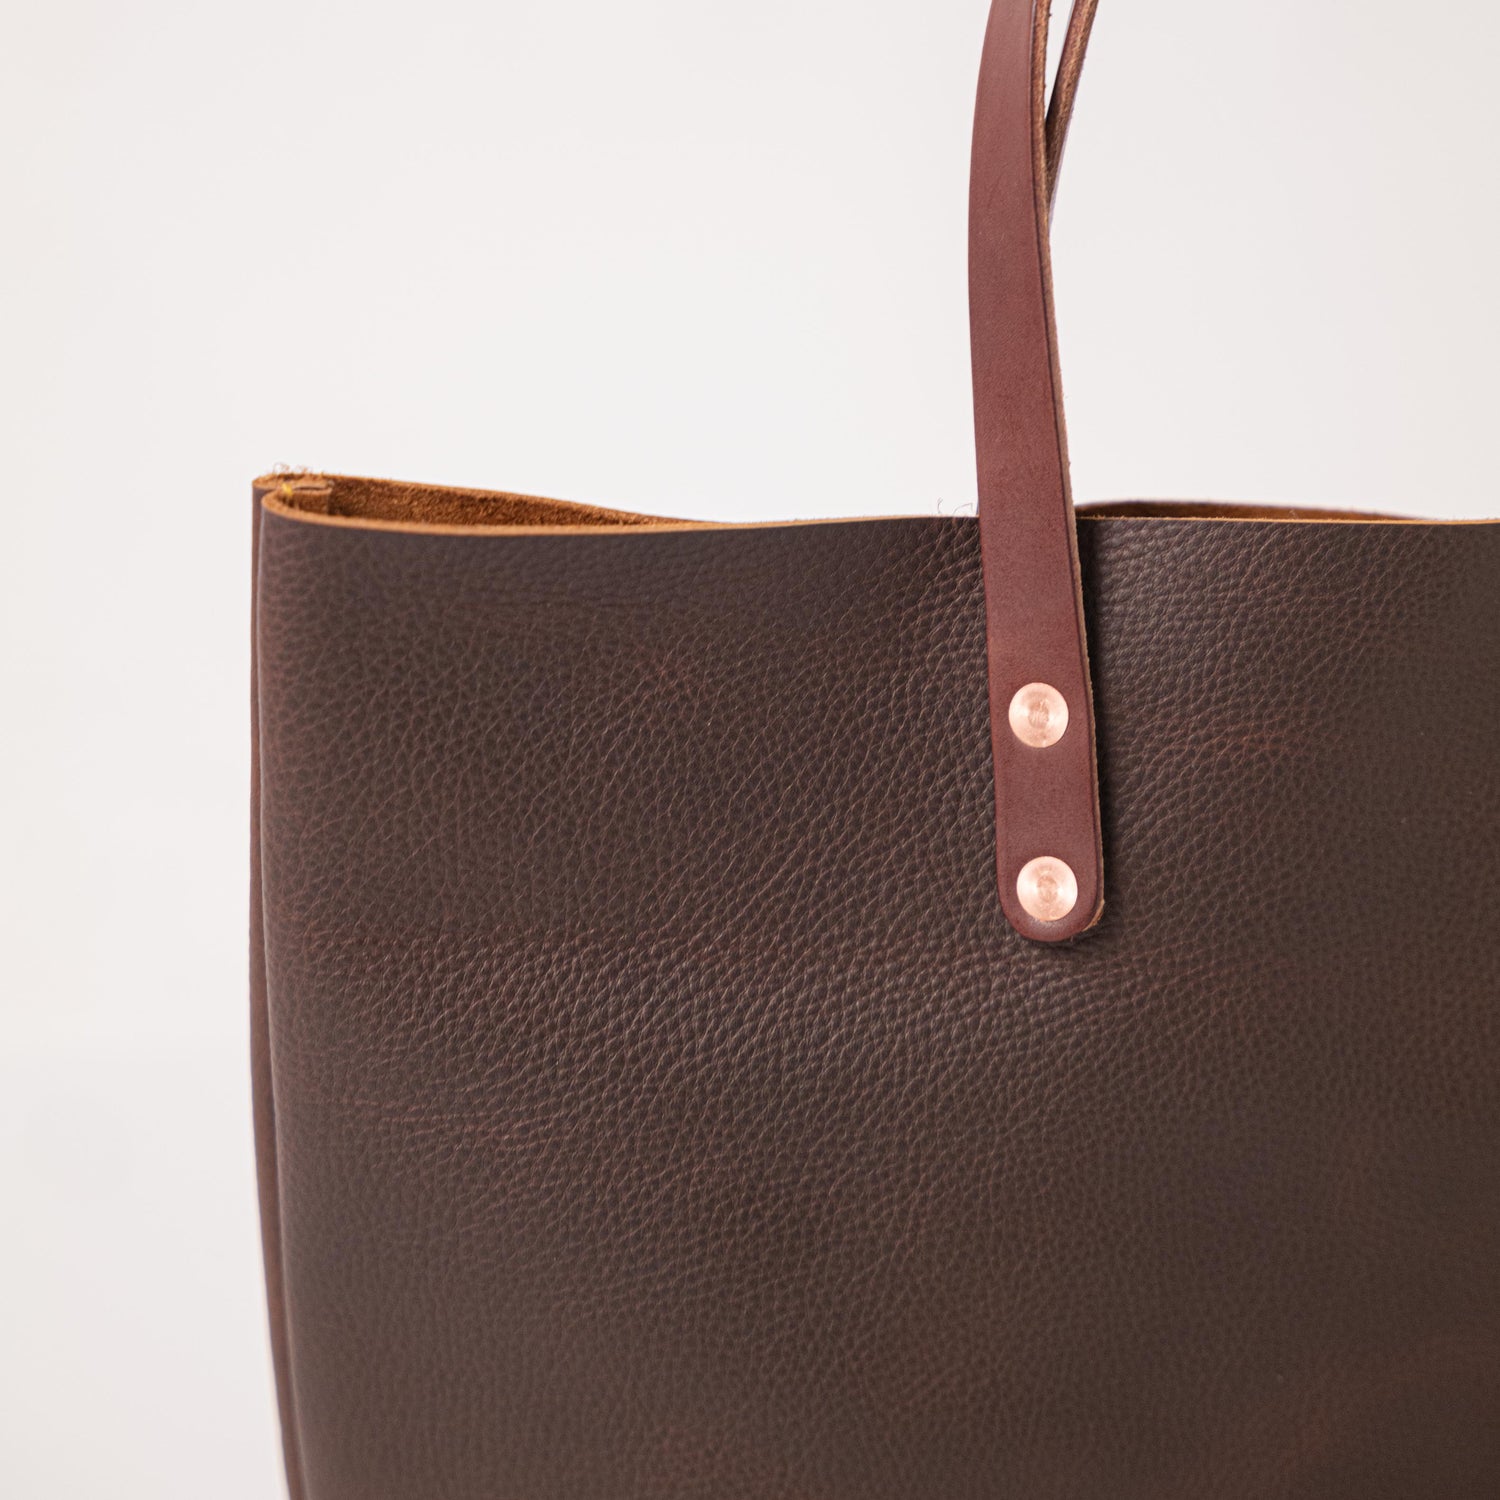 KMM & Co. Leather Tote Bag